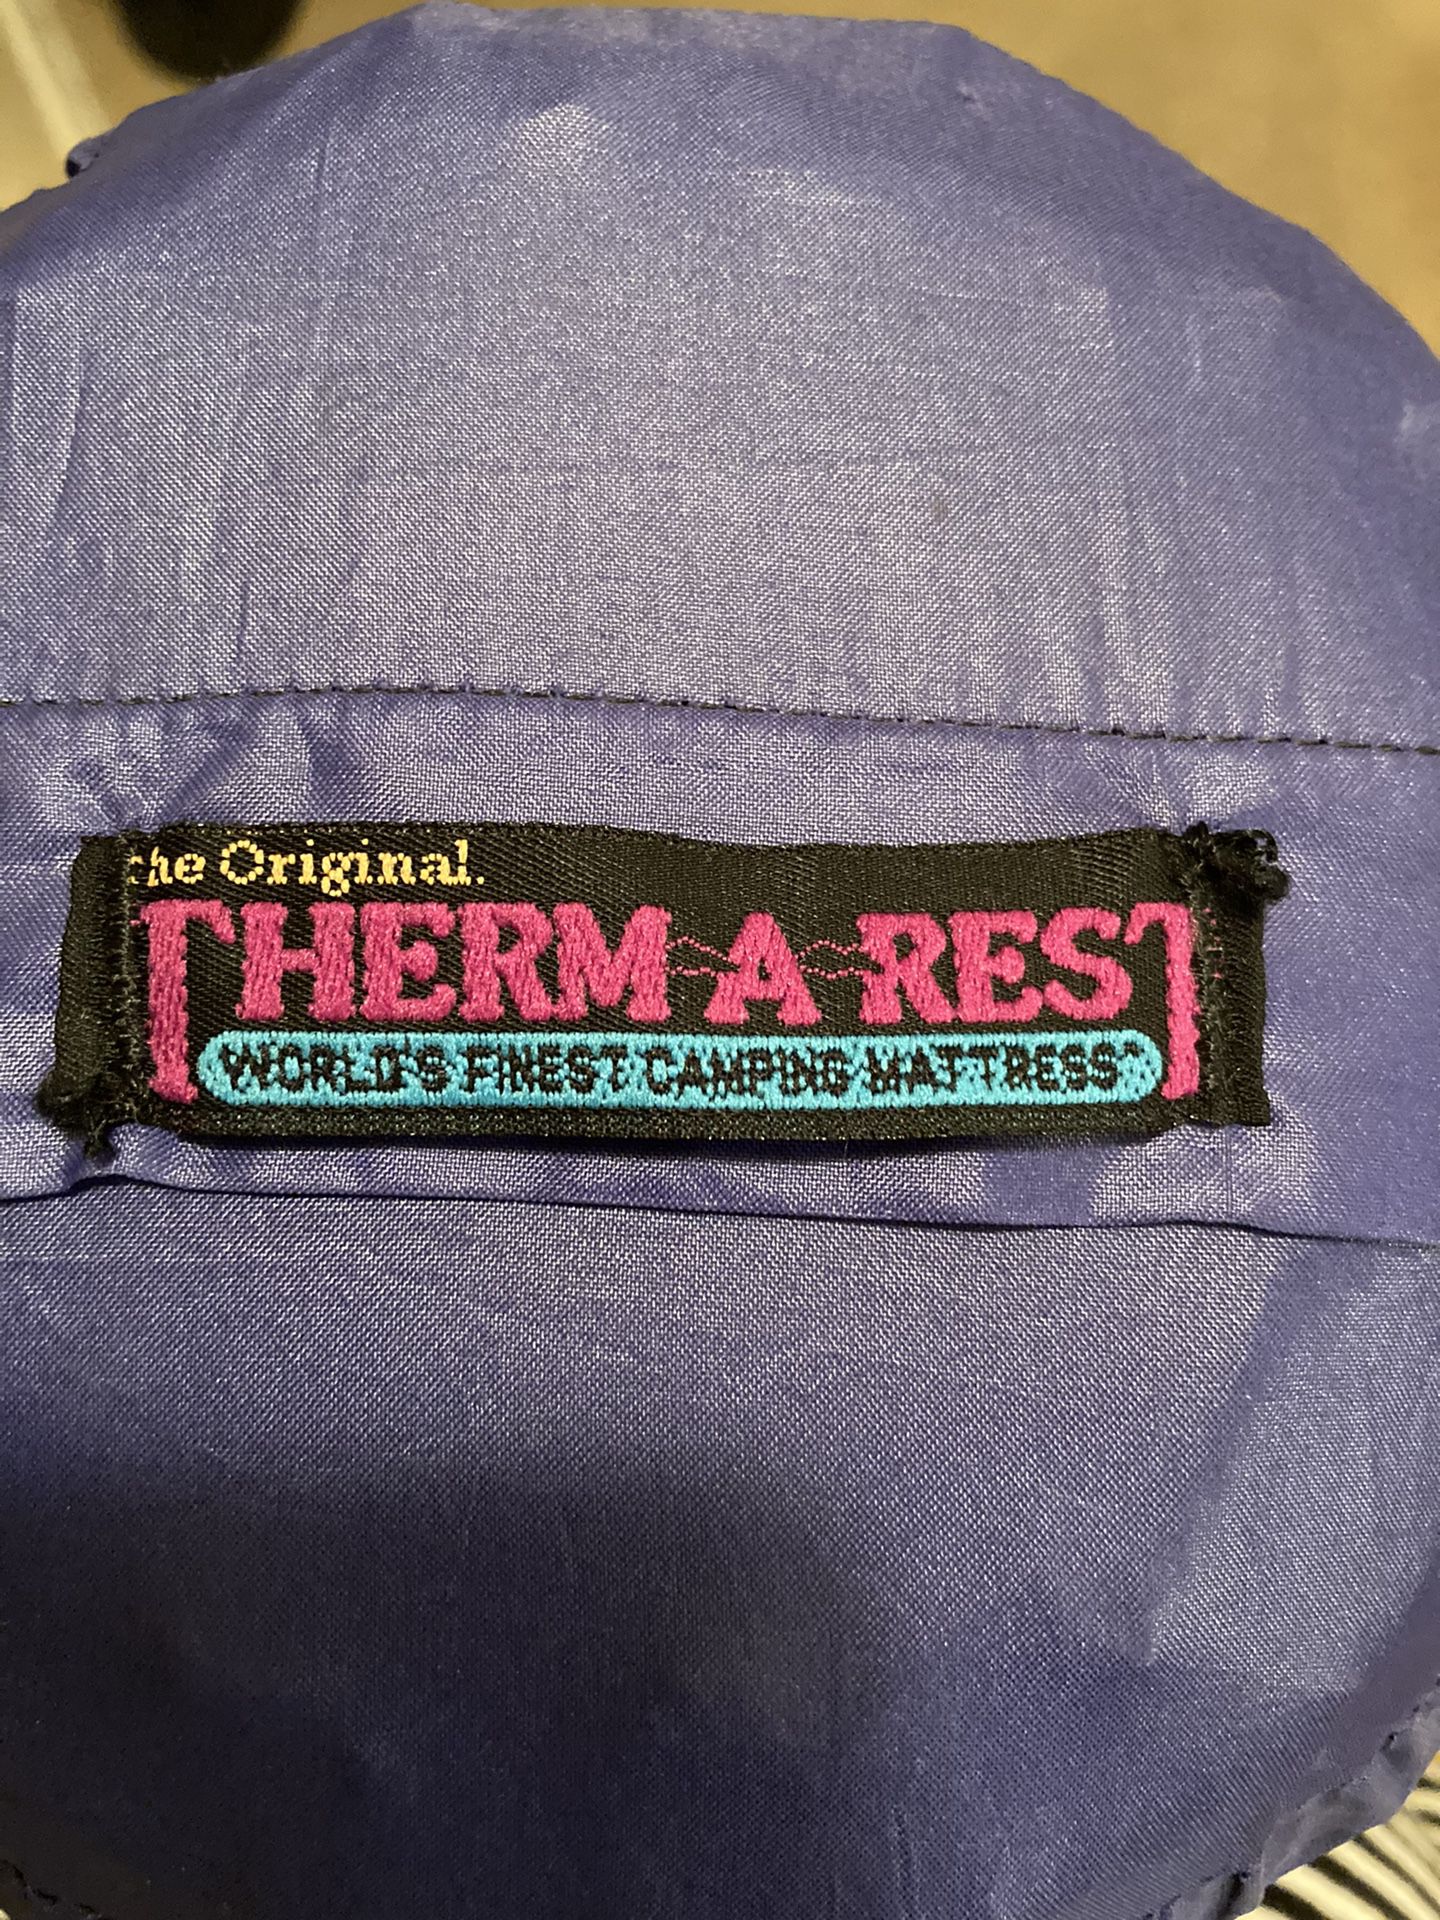 Therm-a-rest camping pad